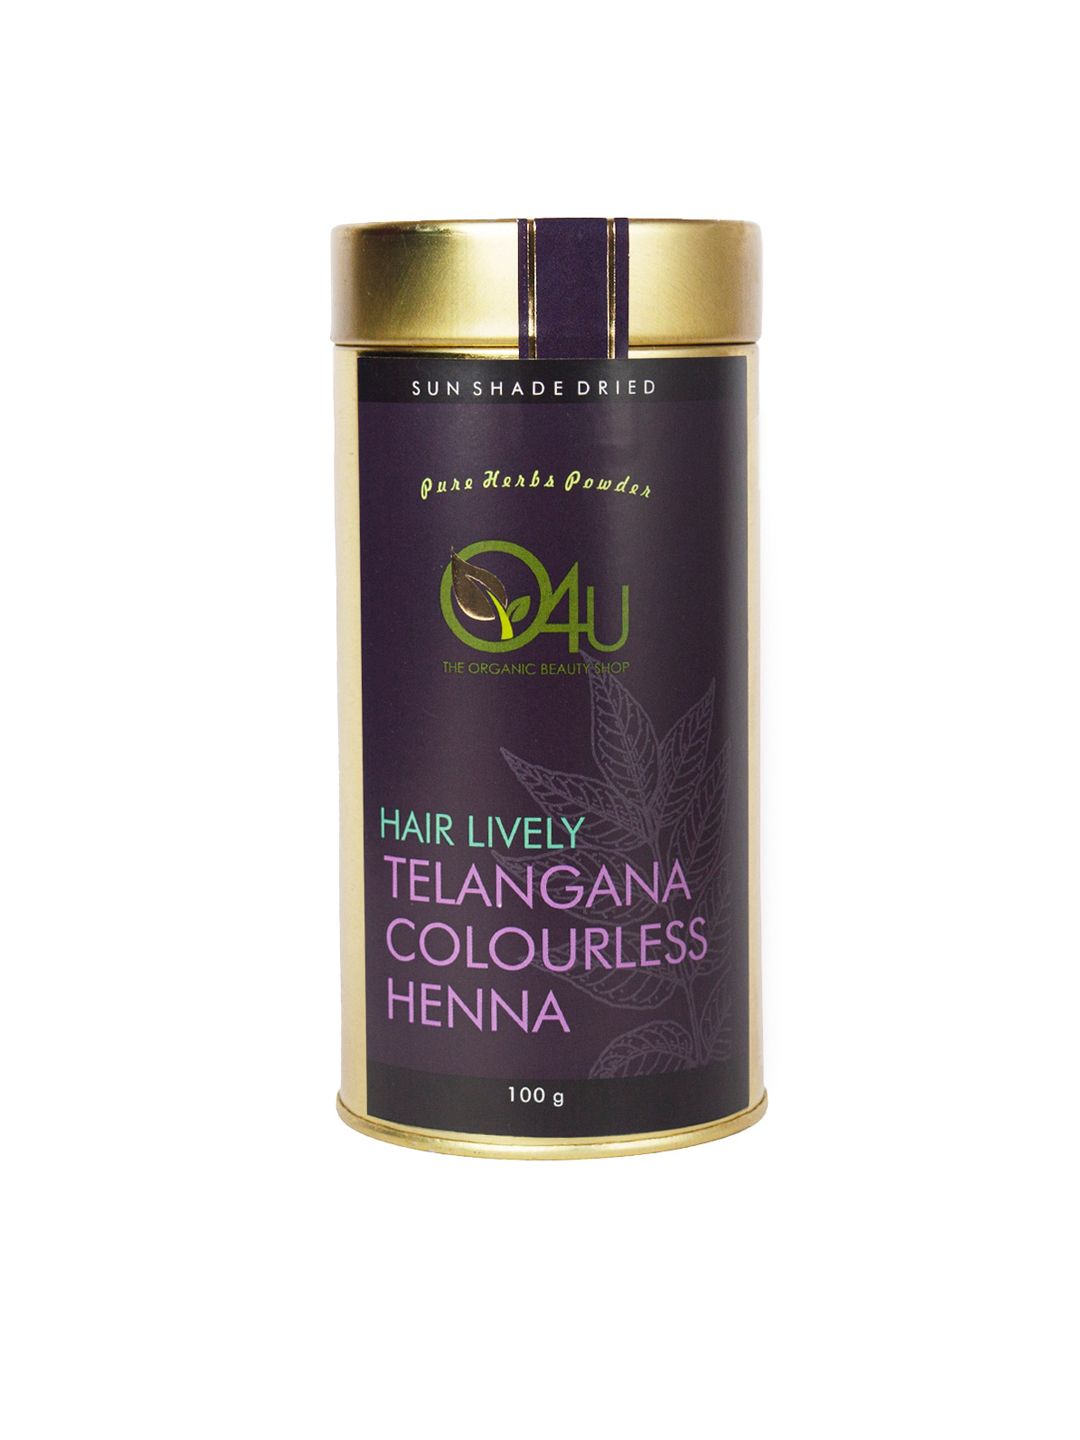 O4U Hair Lively Telangana Colourless Henna Powder for Strong Shiny Hair 100g Price in India